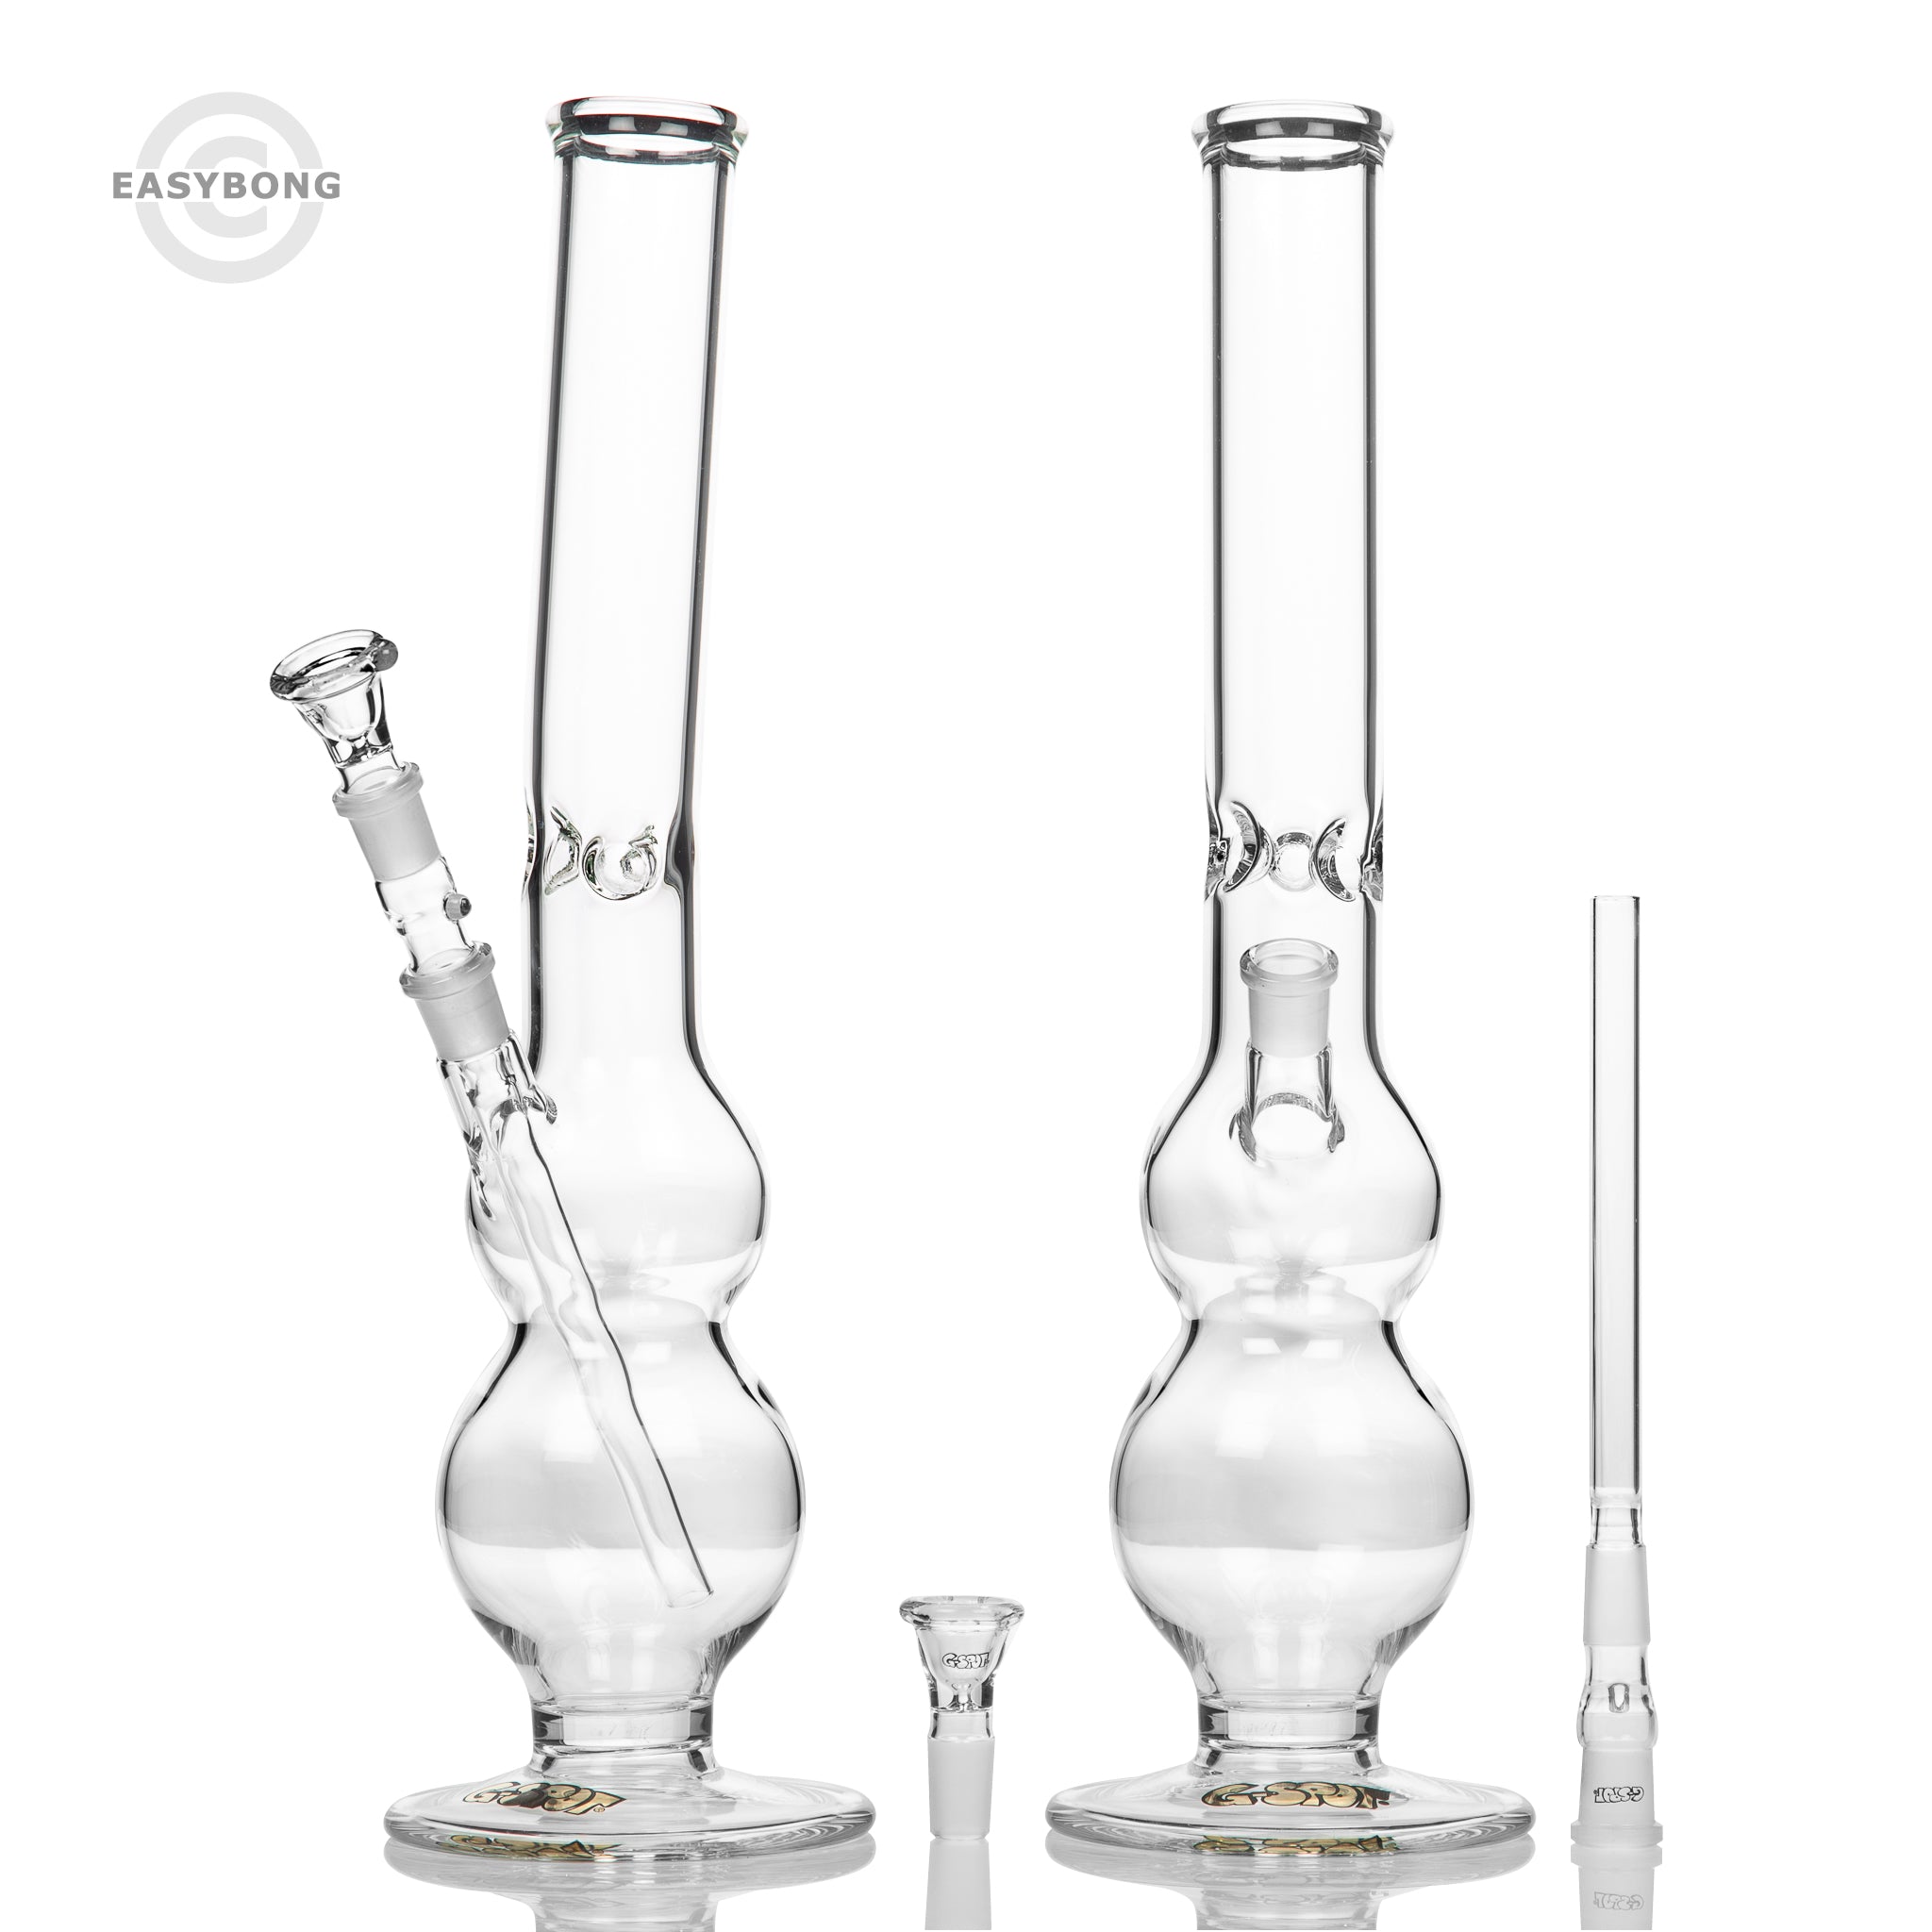 Gspot double egg glass ice bong with stem and cone.